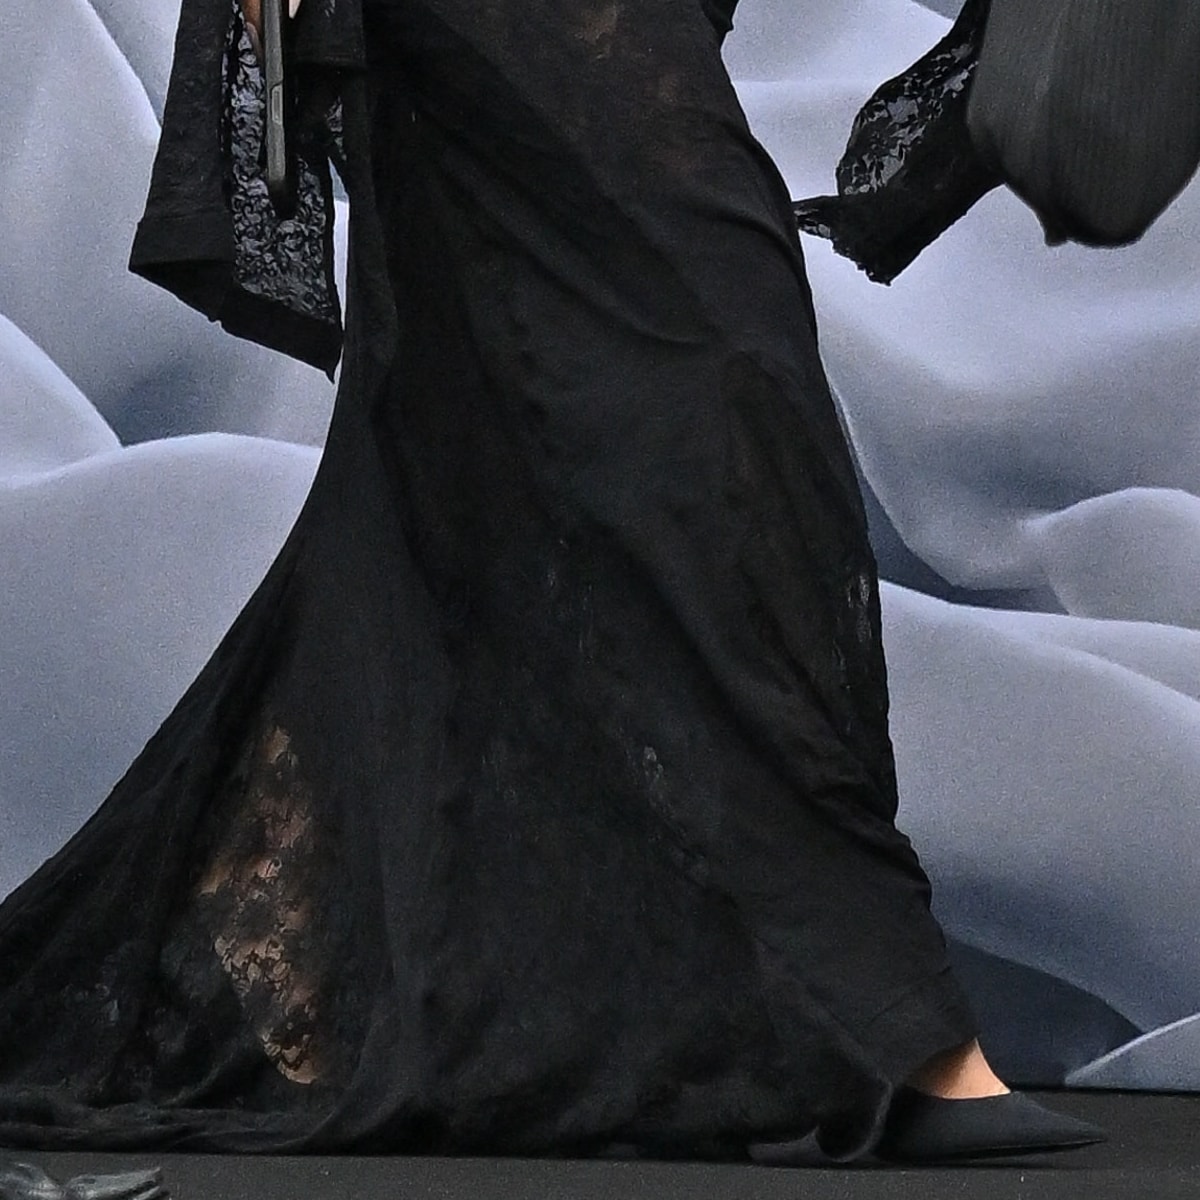 Underneath her dramatic gown, Kim Kardashian paired her look with elegant black high-heeled pumps, adding a classic touch to her avant-garde ensemble